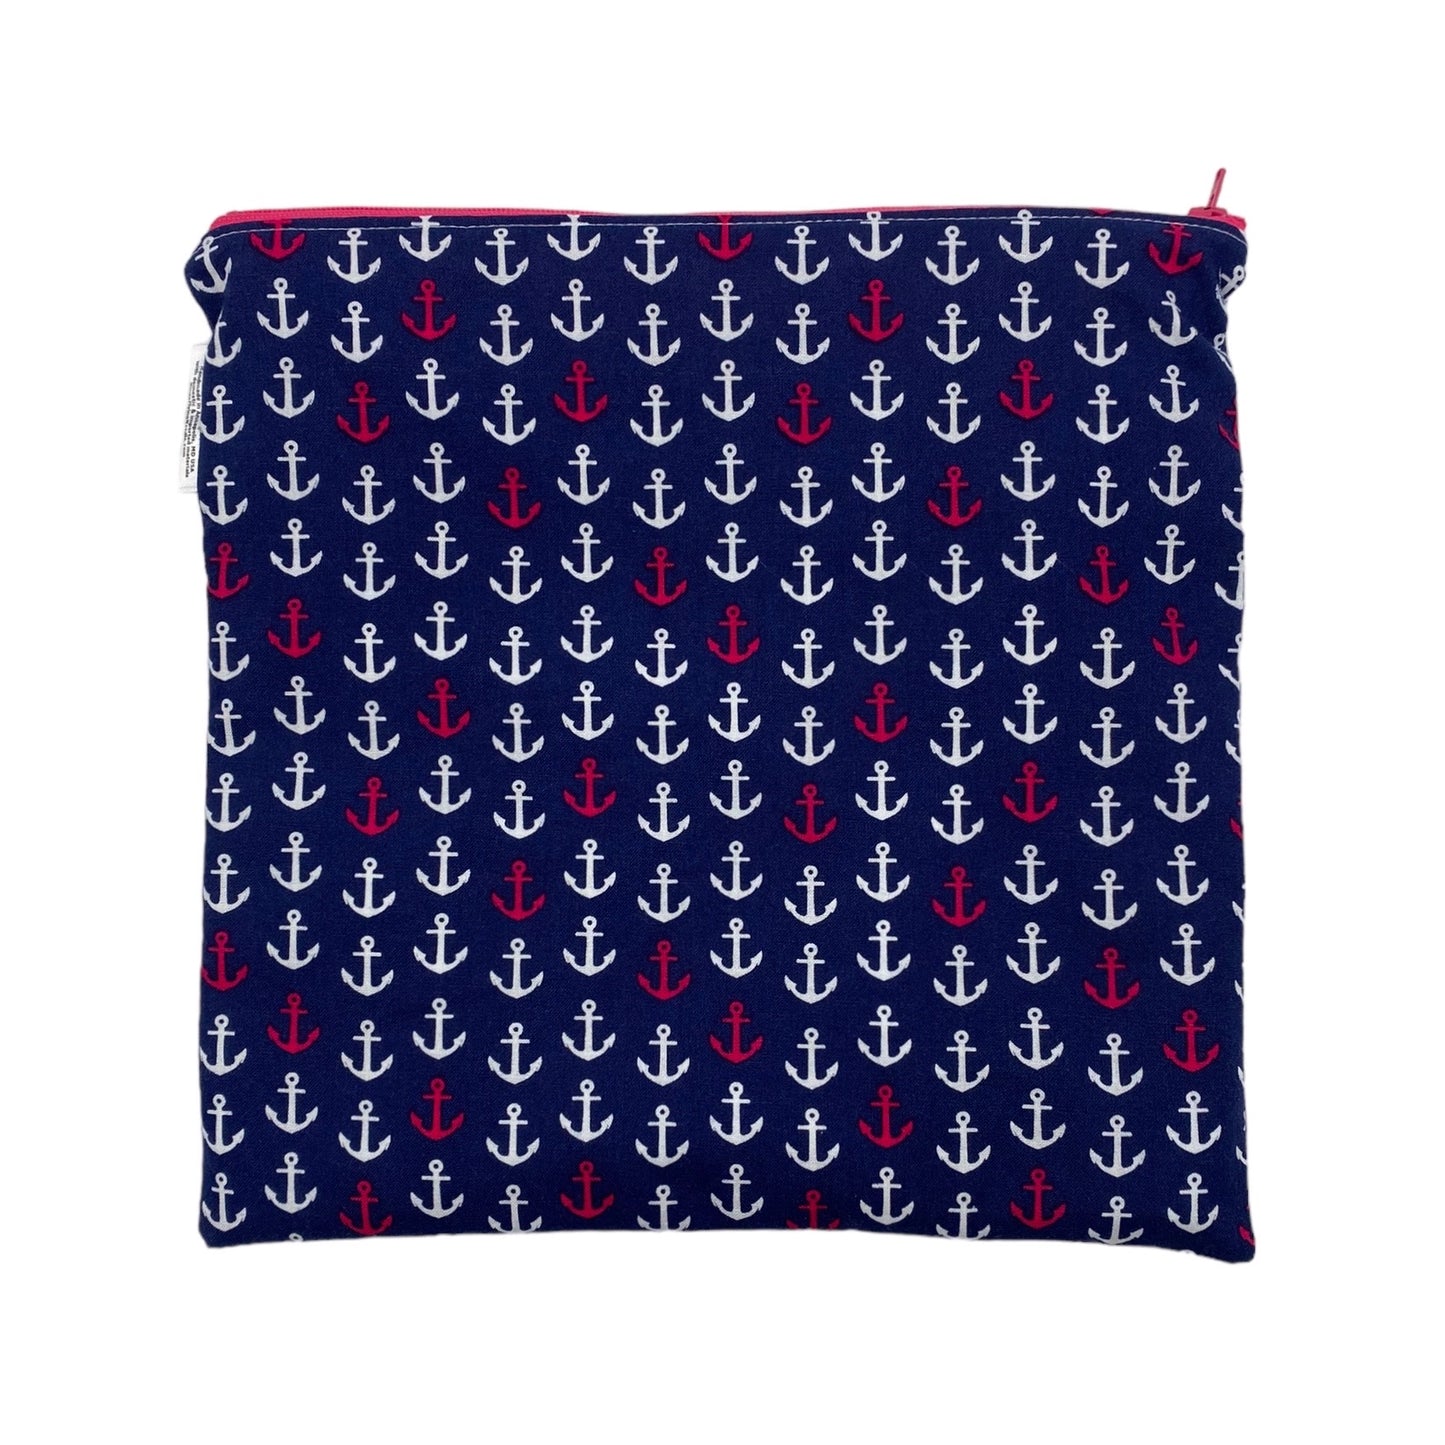 Gallon Sized Reusable Zippered Bag Anchors Pink on Navy